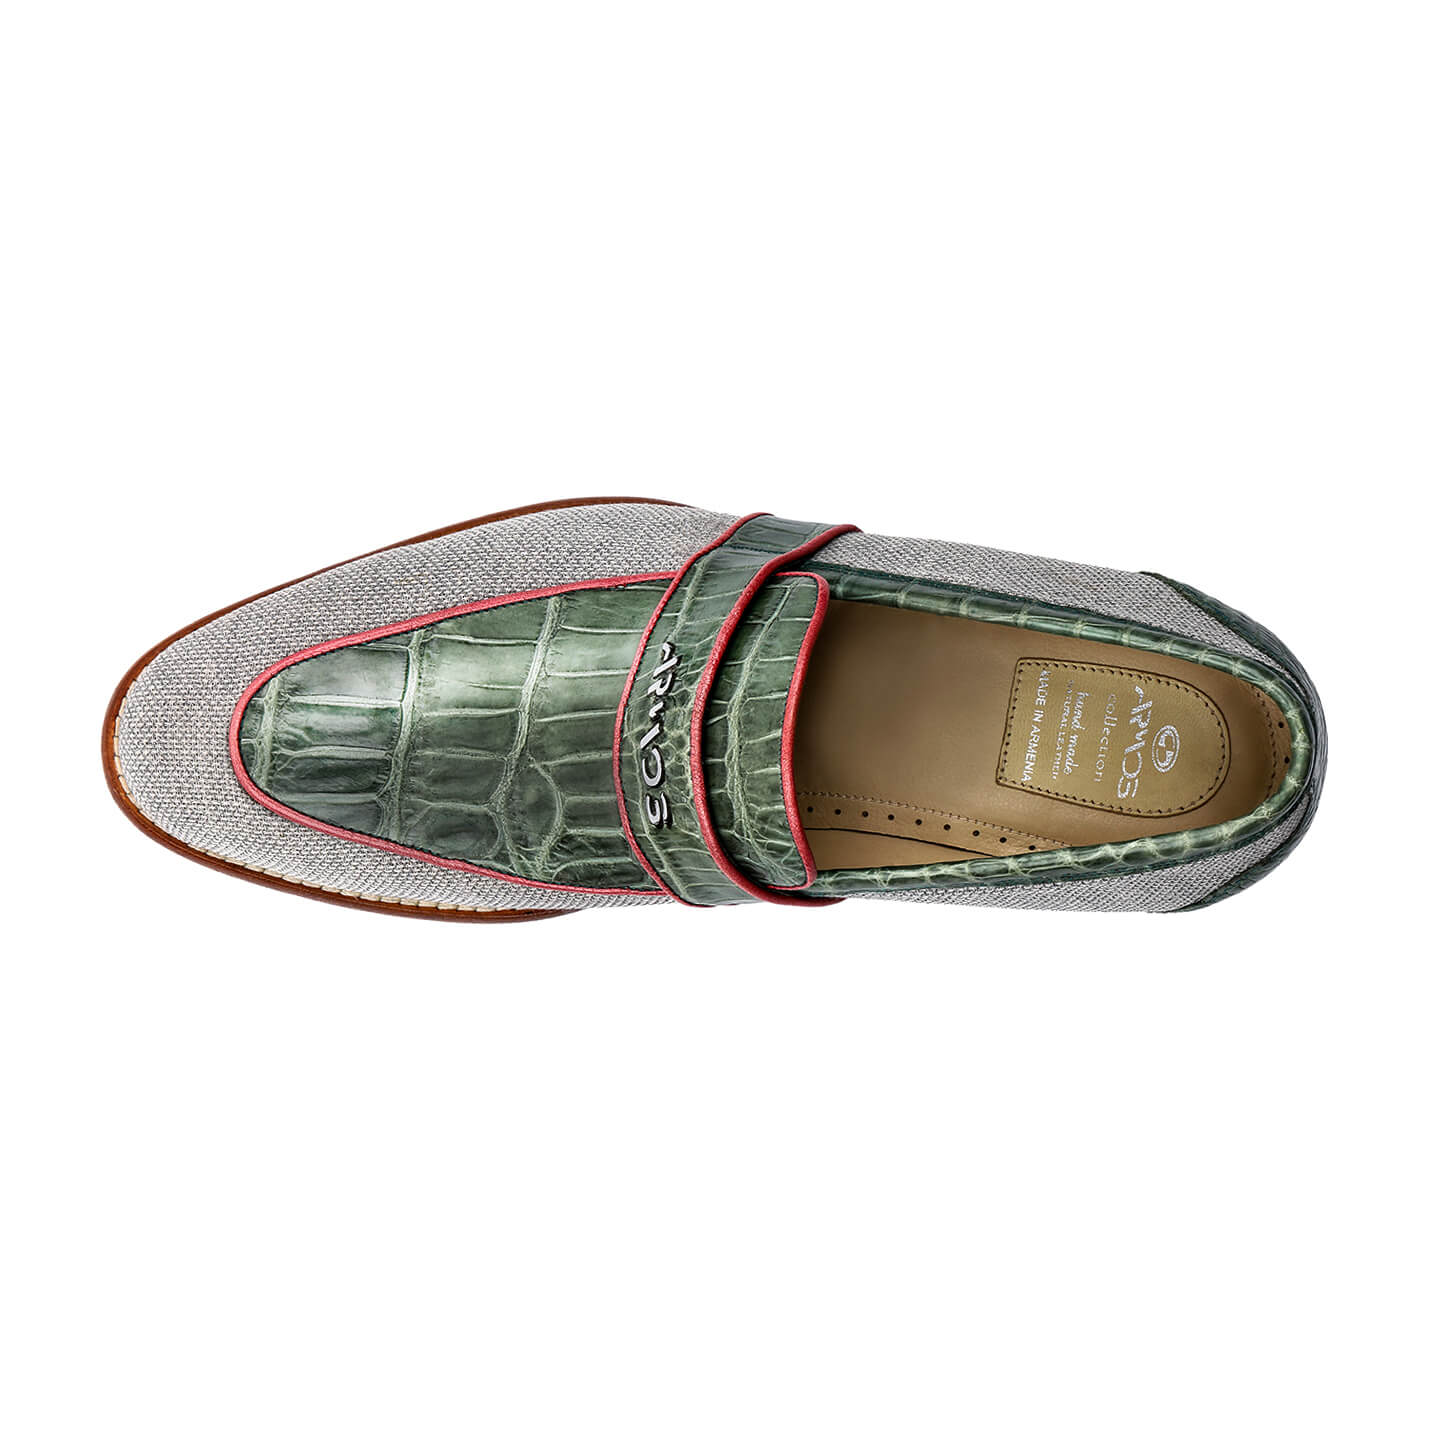 Exotic loafers